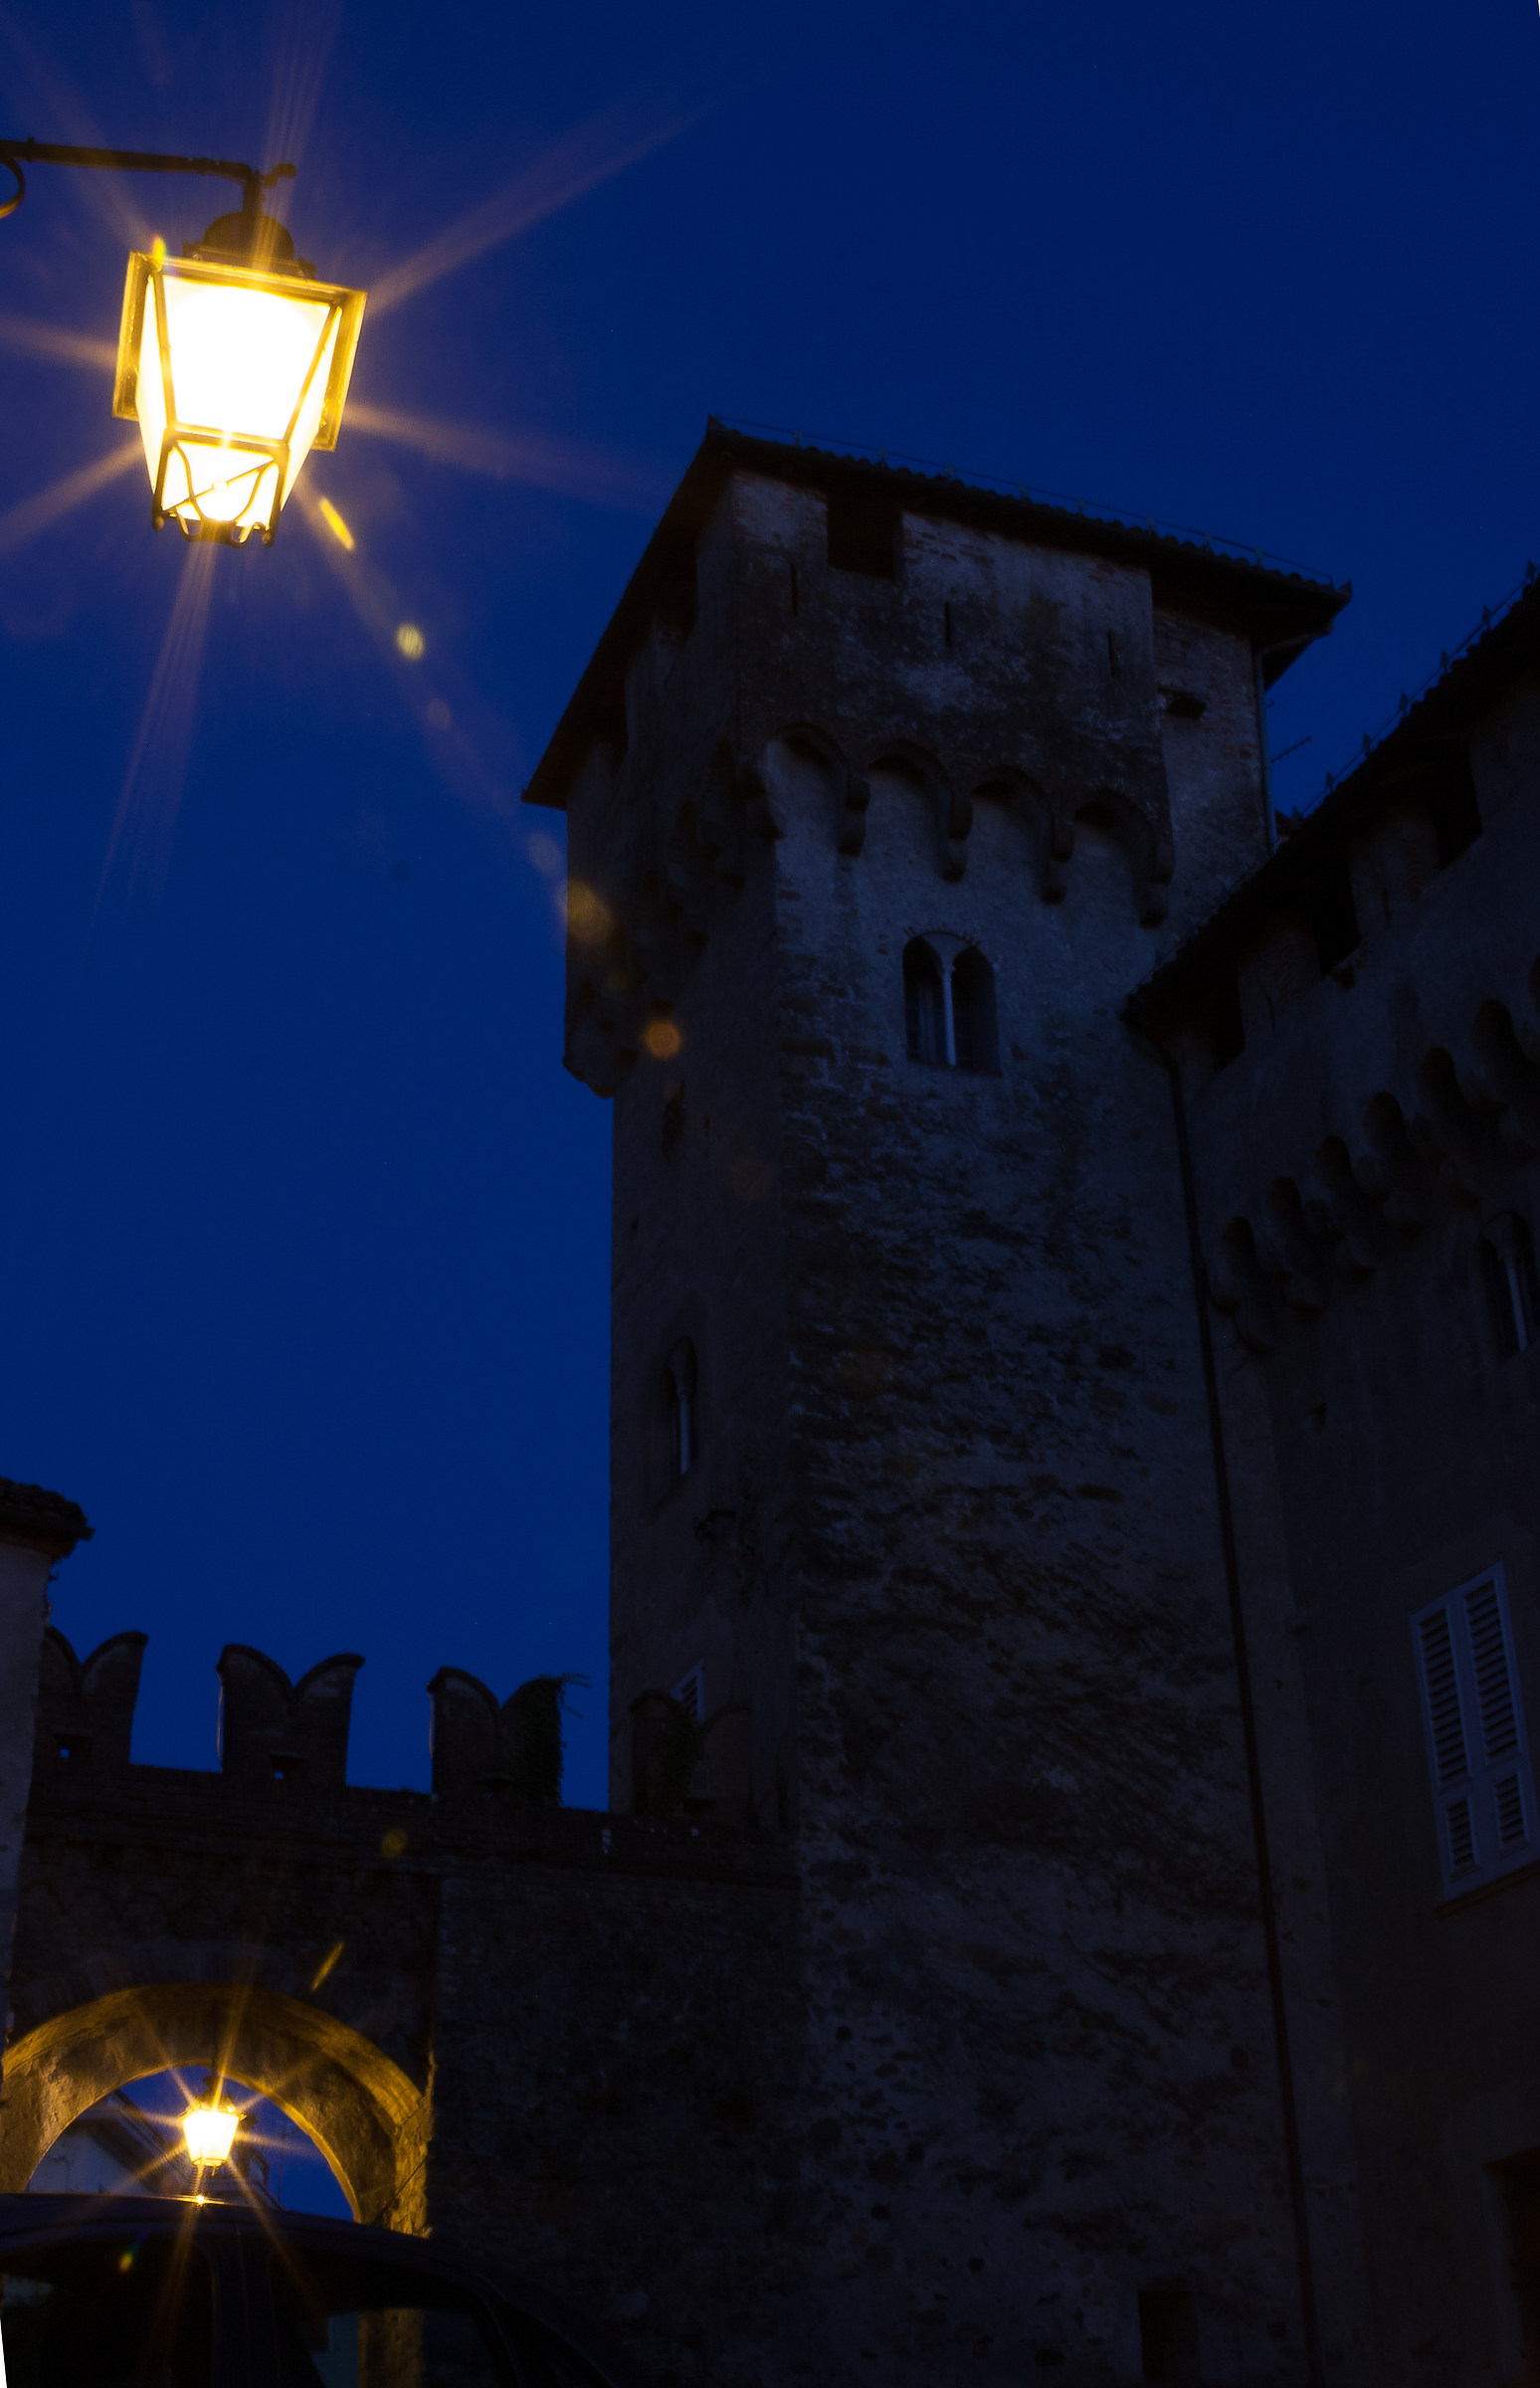 The castle and the lantern...